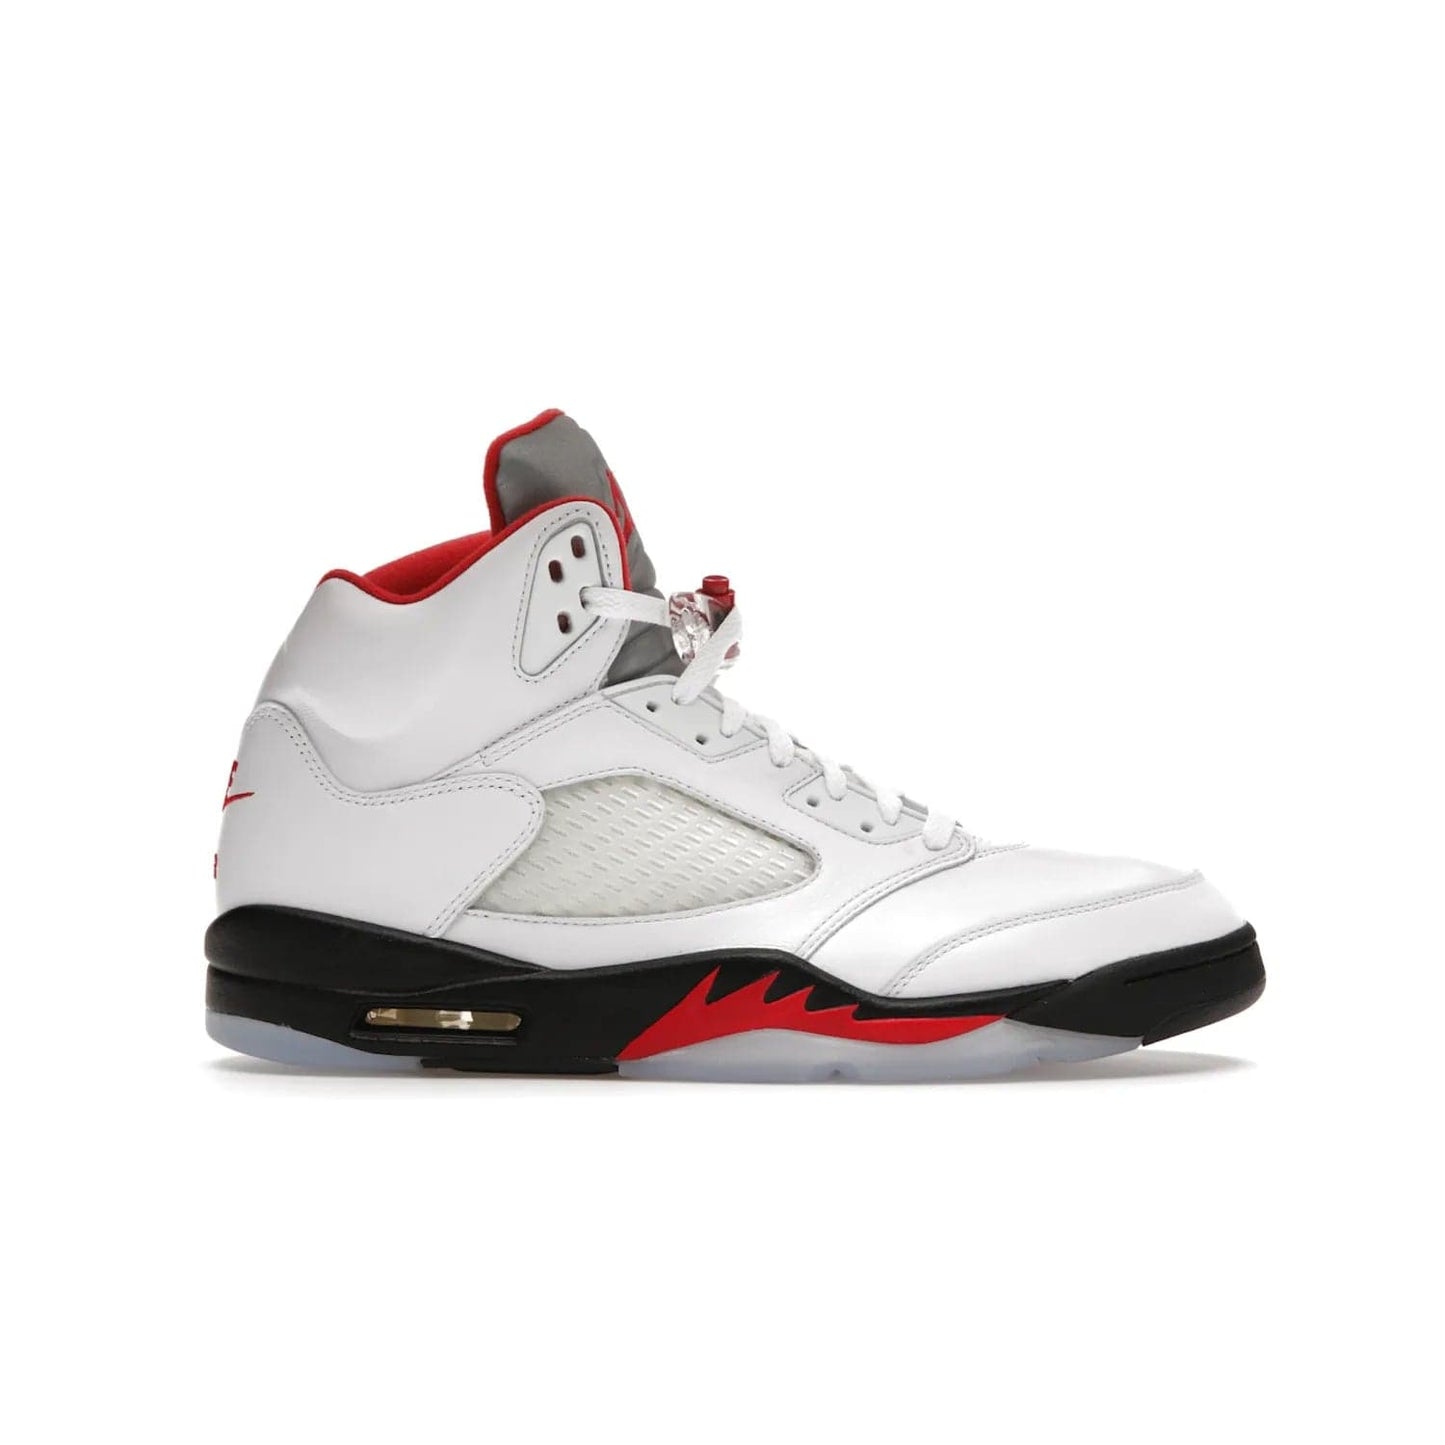 Jordan 5 Retro Fire Red Silver Tongue (2020) - Image 1 - Only at www.BallersClubKickz.com - Experience classic styling with the Jordan 5 Retro Fire Red Silver Tongue (2020). Features a white leather upper, 3M reflective tongue, midsole colorblocking, and an icy translucent outsole. Now available, upgrade your shoe collection today.